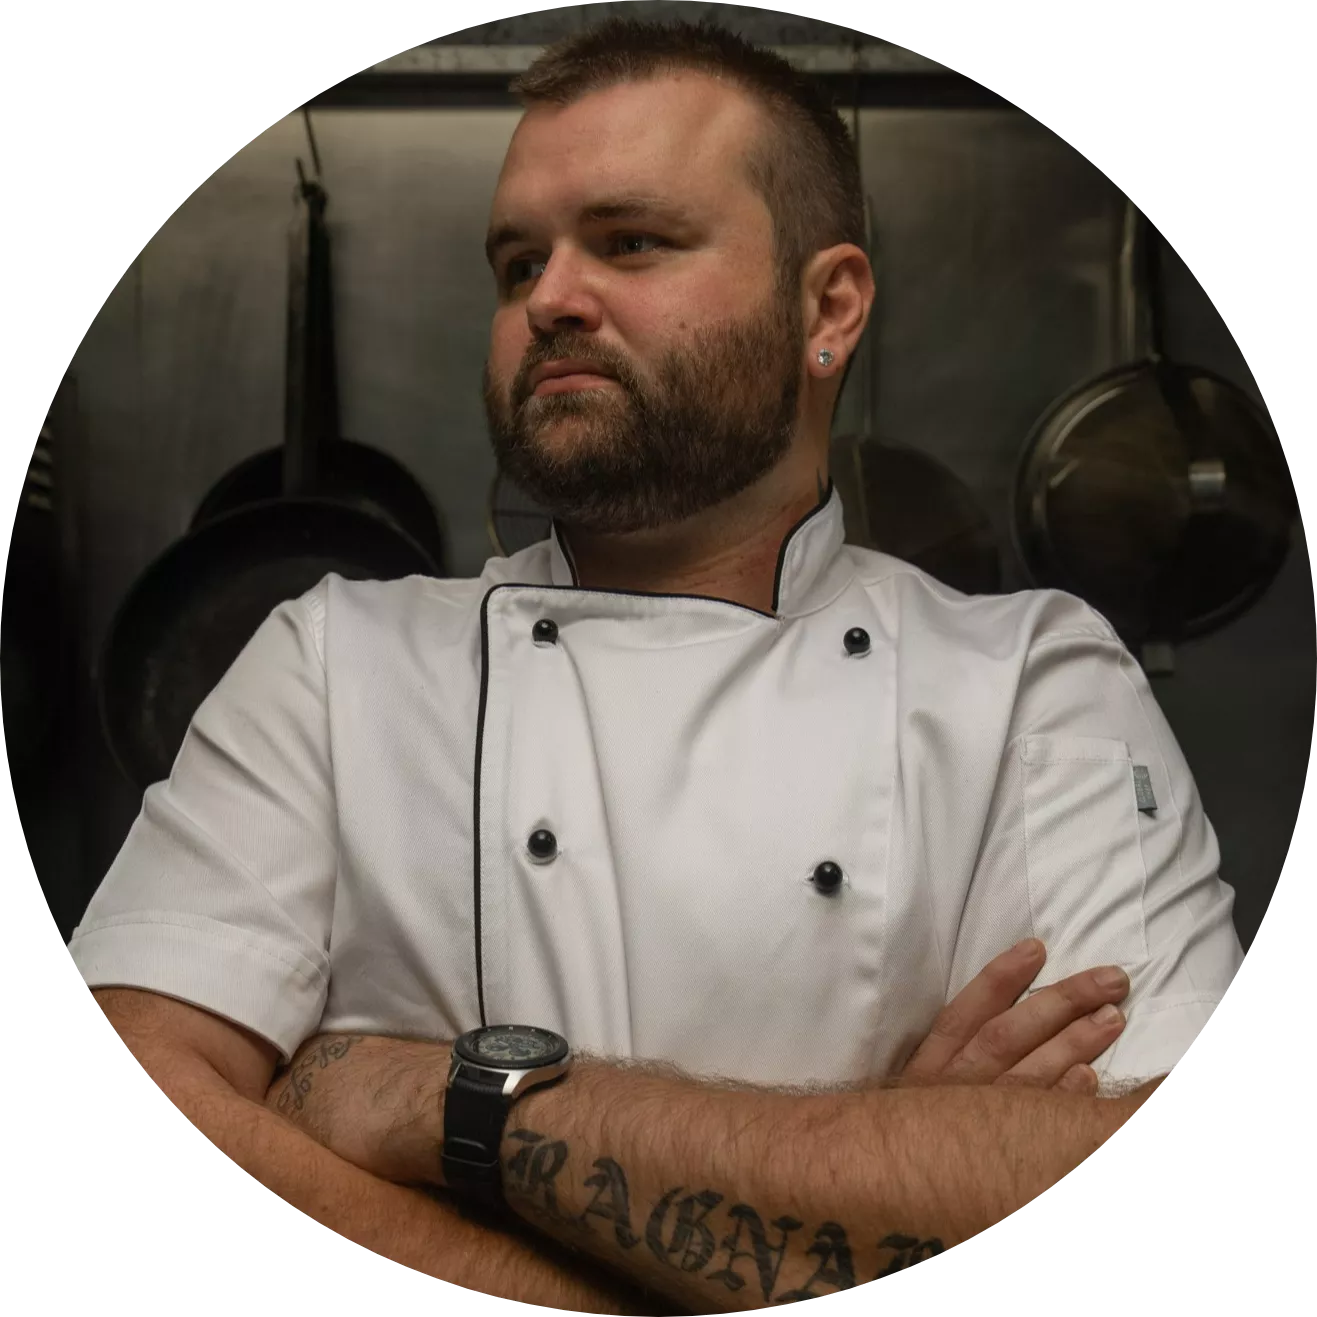 Shaun Leach: Head Chef posing with expresion: no soup for you